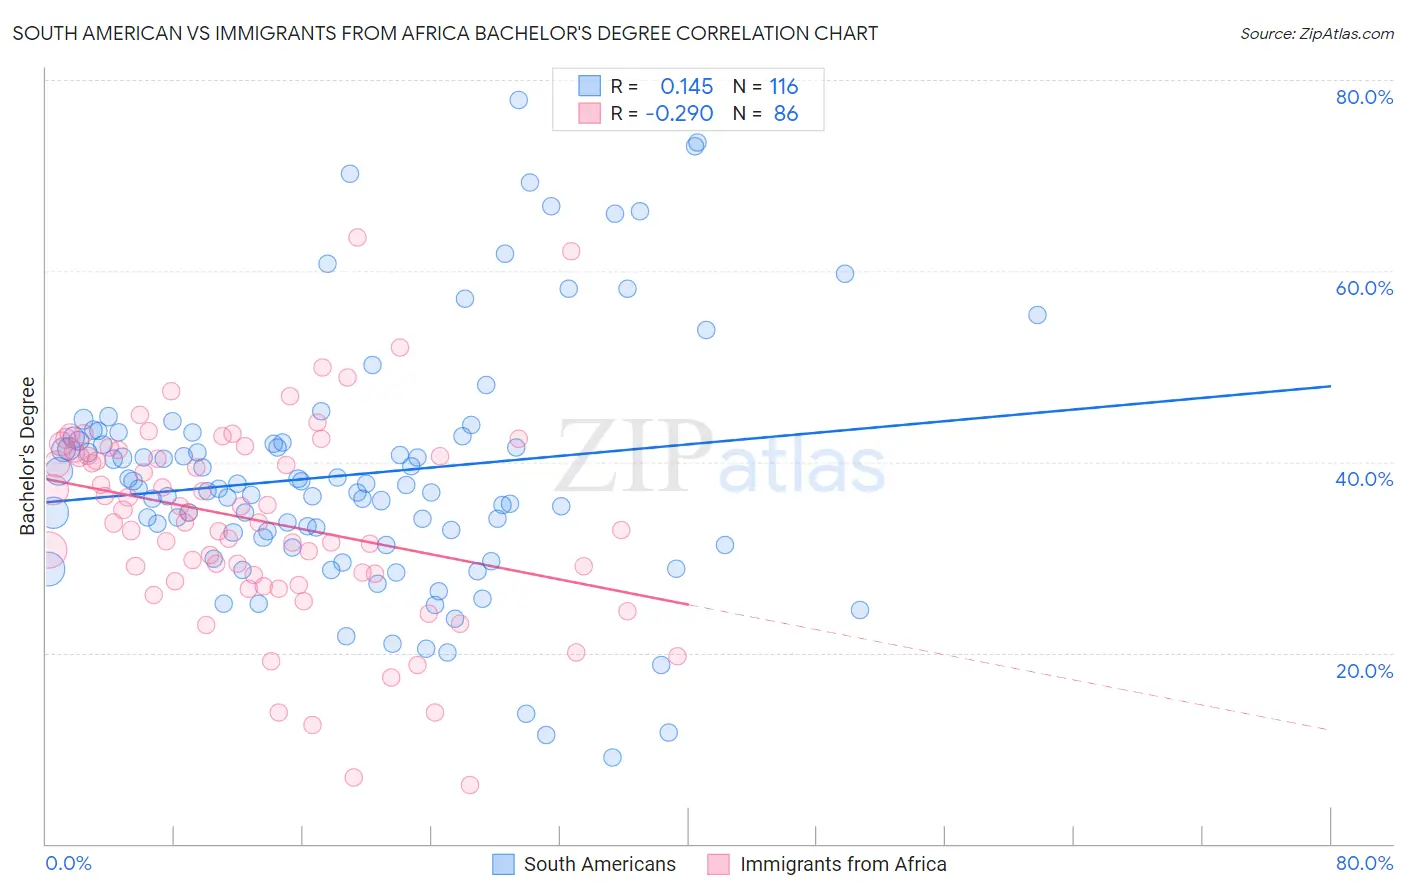 South American vs Immigrants from Africa Bachelor's Degree